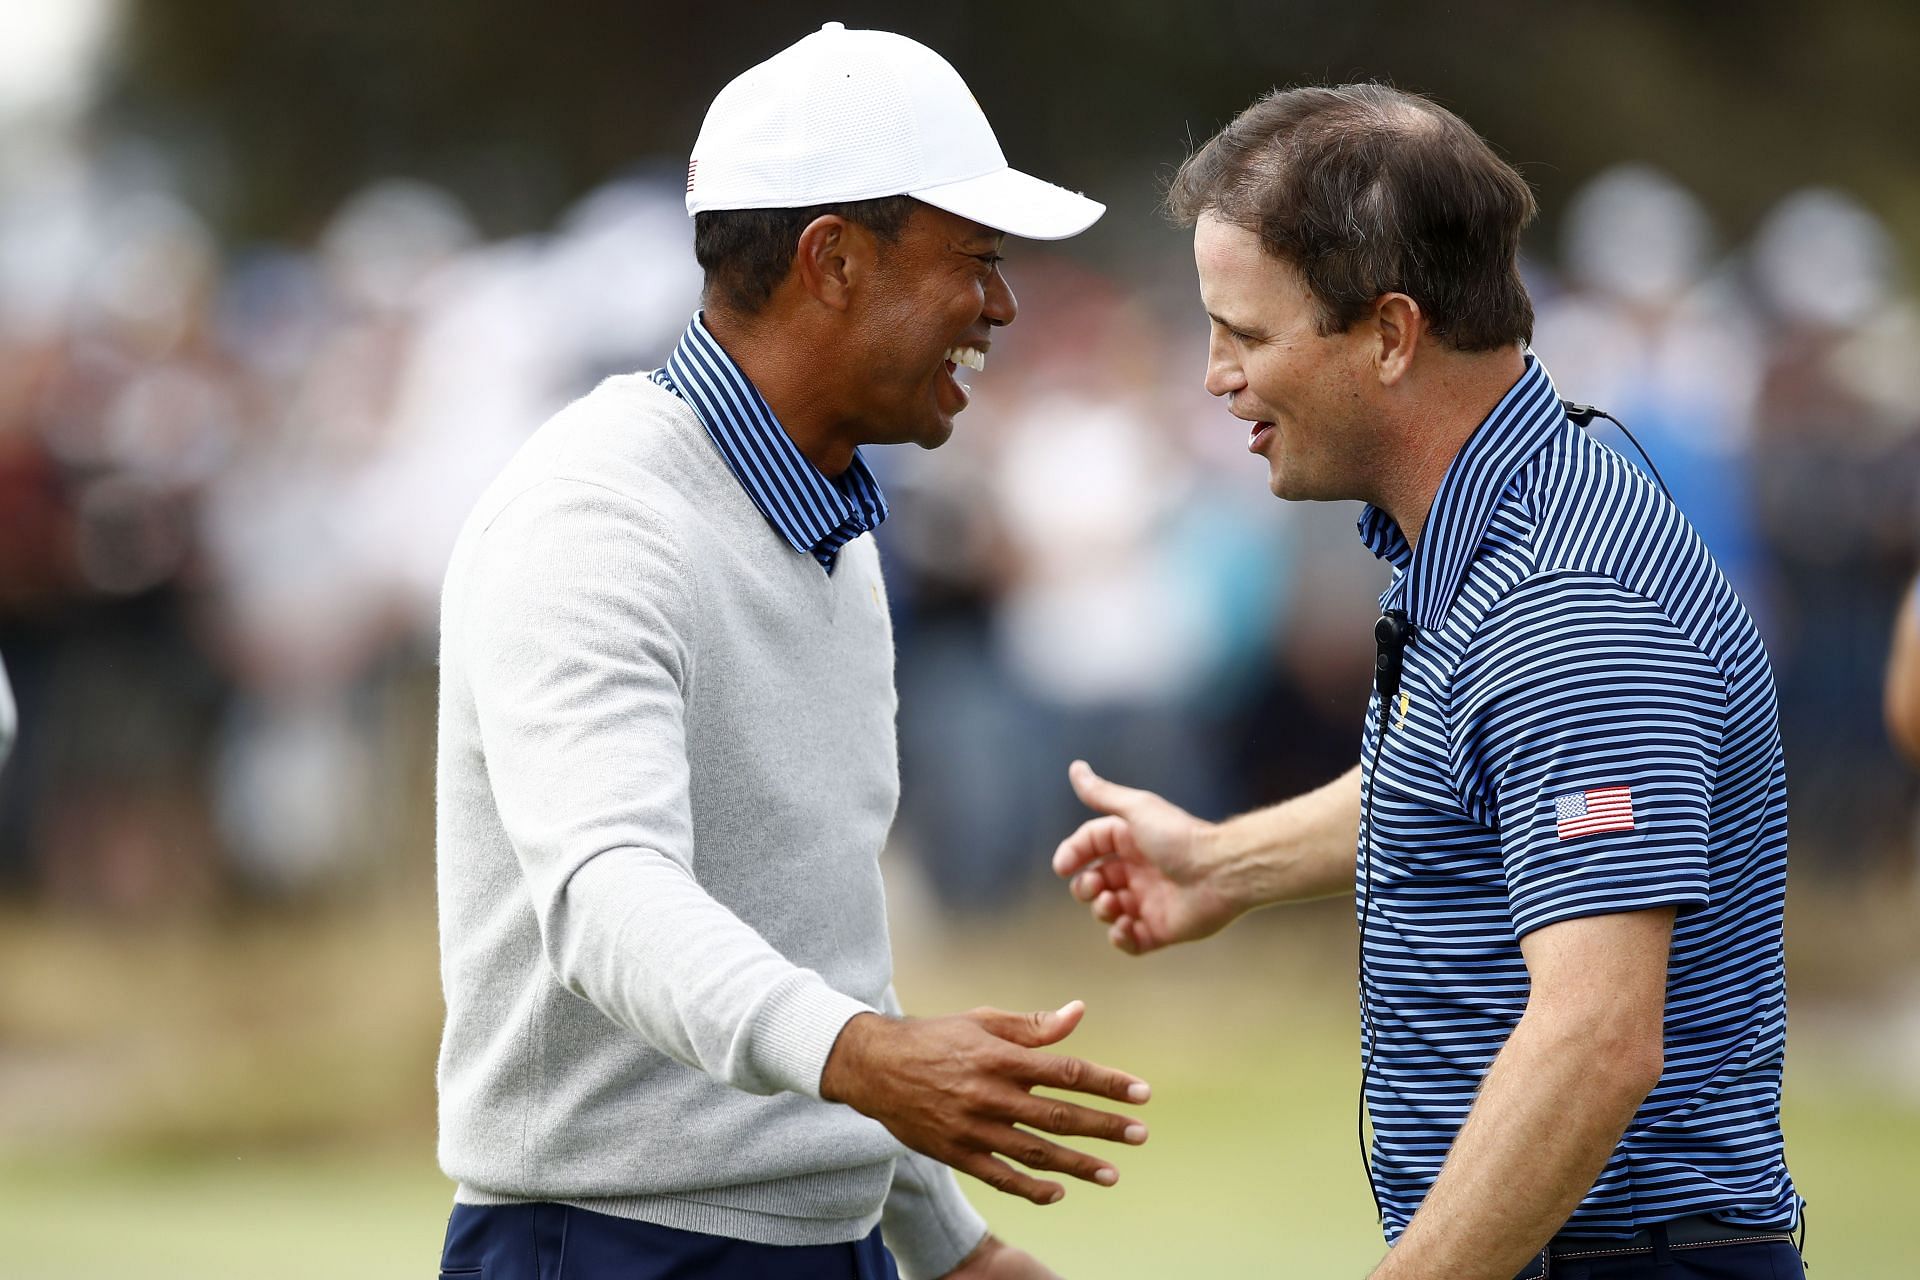 Tiger Woods and Zach Johnson at the 2019 Presidents Cup (Image via Getty)